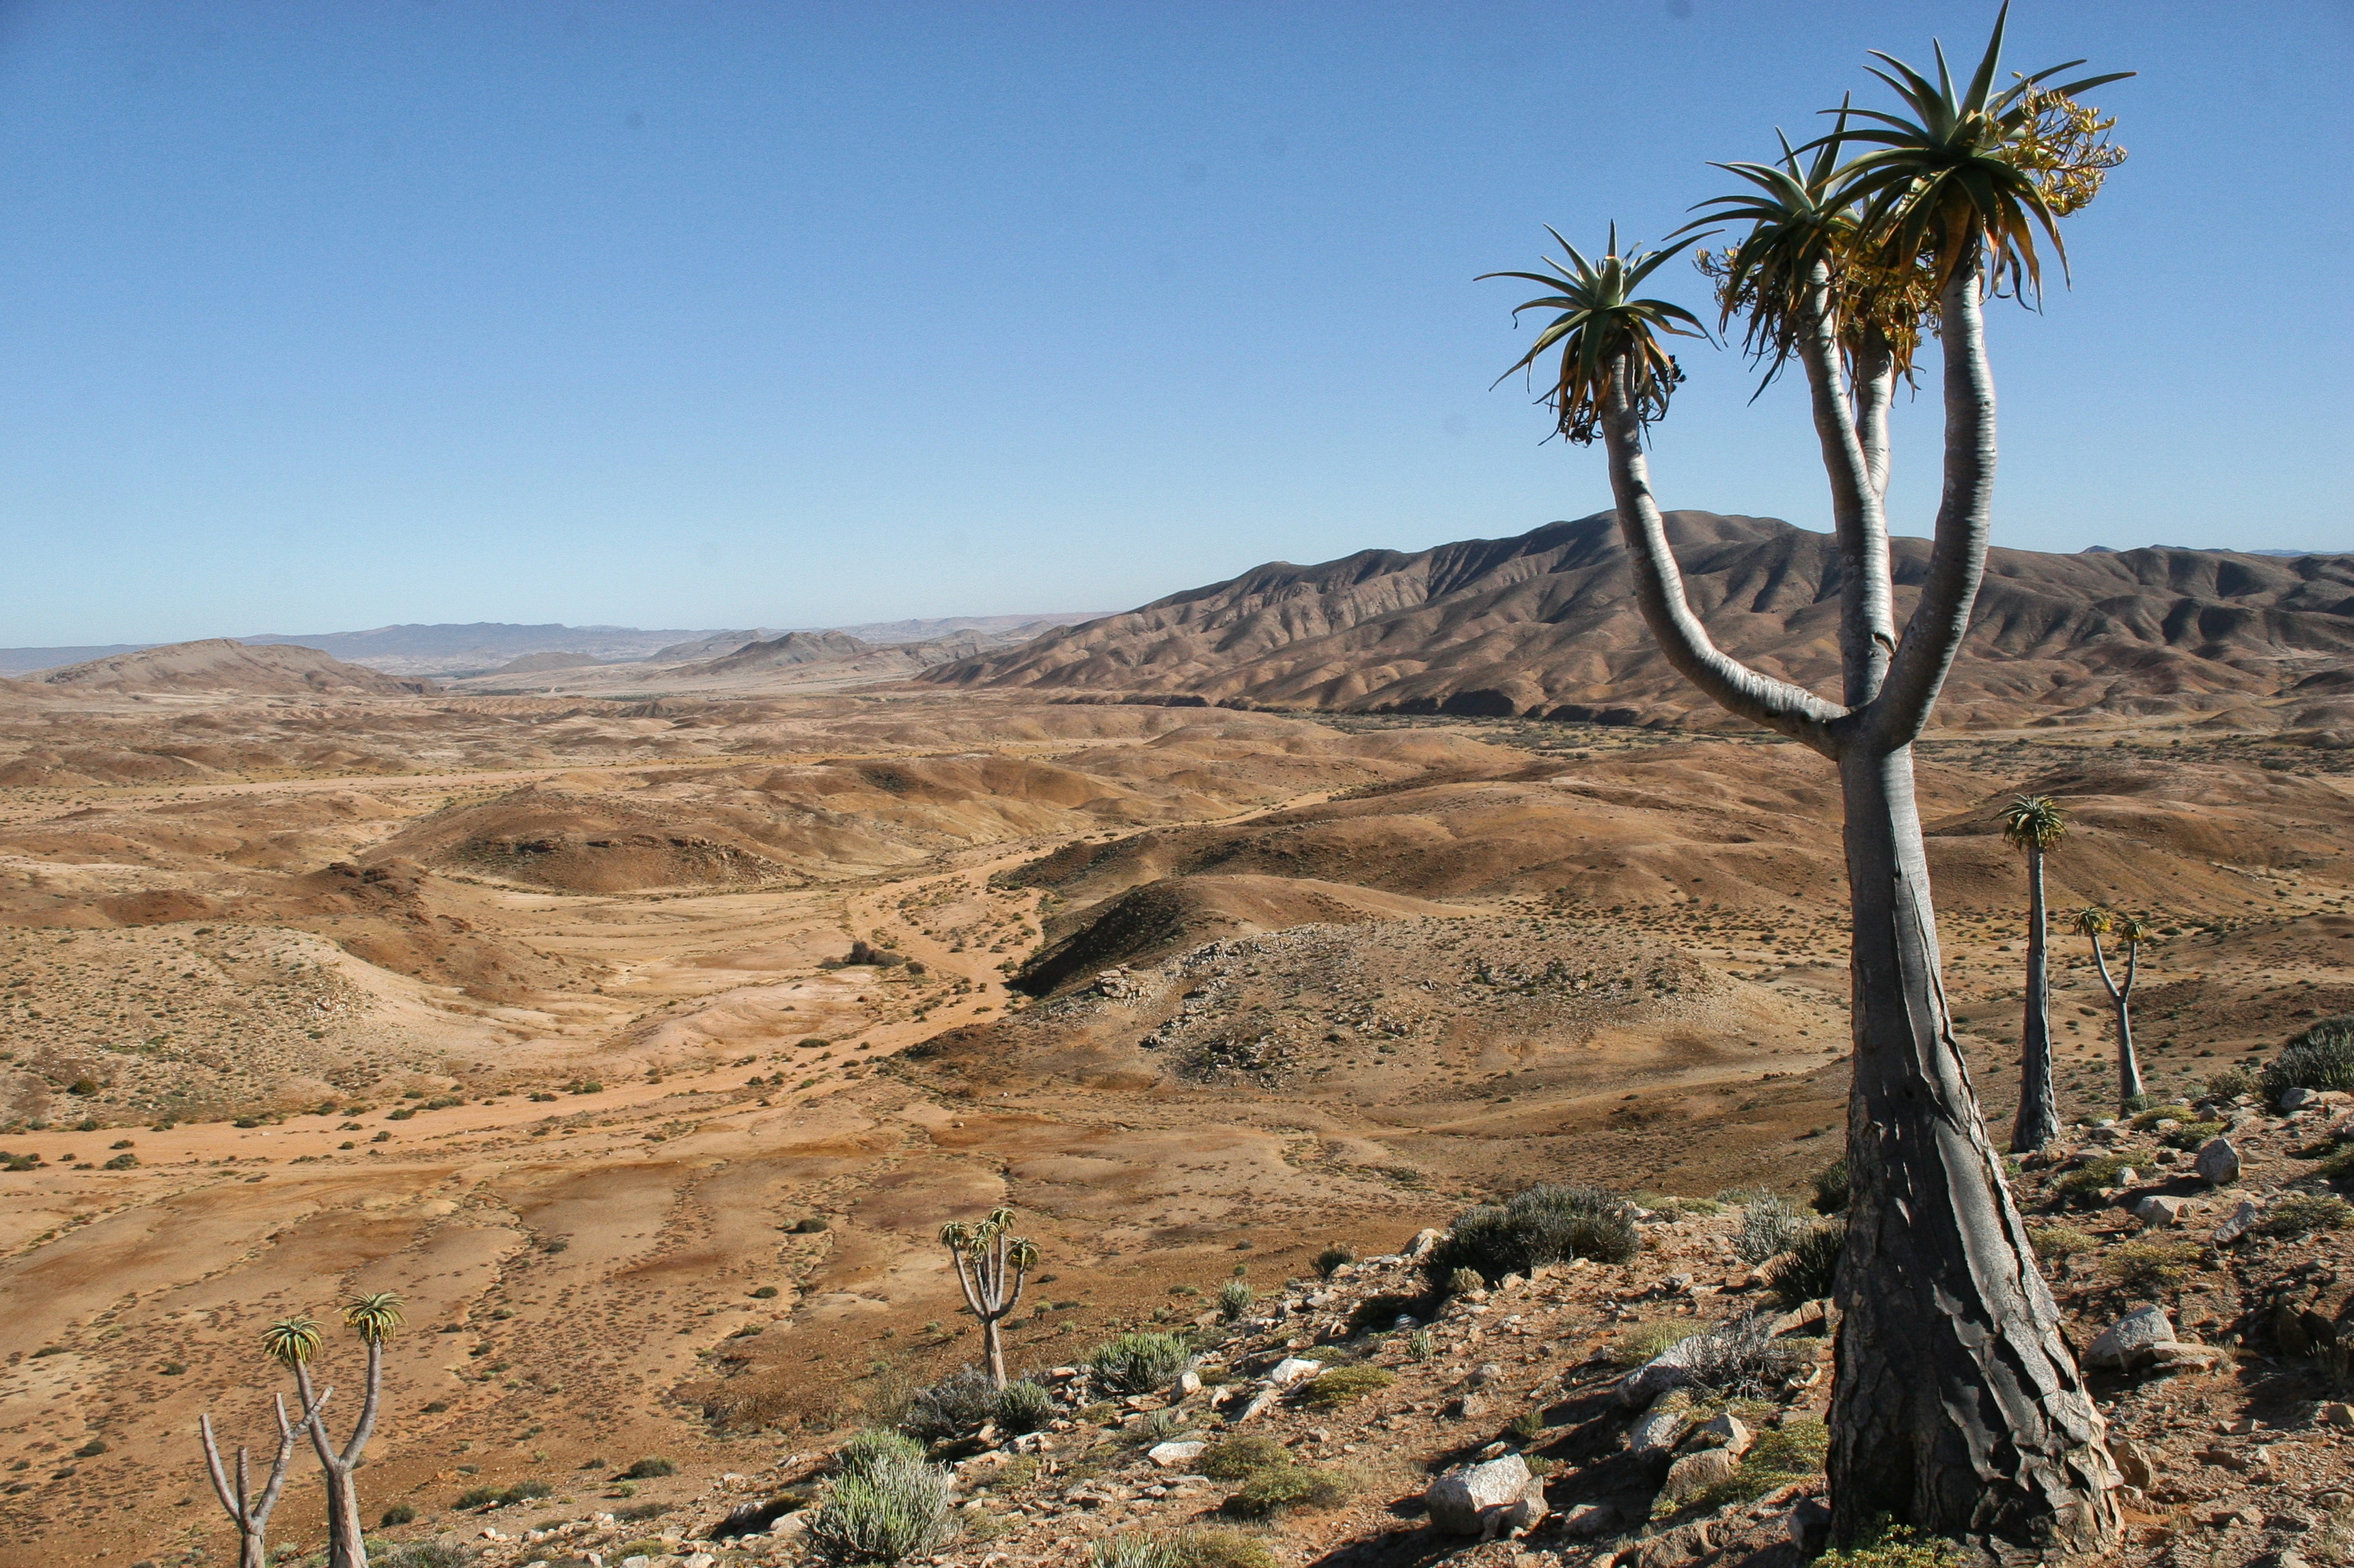 If you venture further east towards the Ai-Ais Richtersveld Transfrontier Park, you will find Cornell’s Kop, named after the legendary prospector.